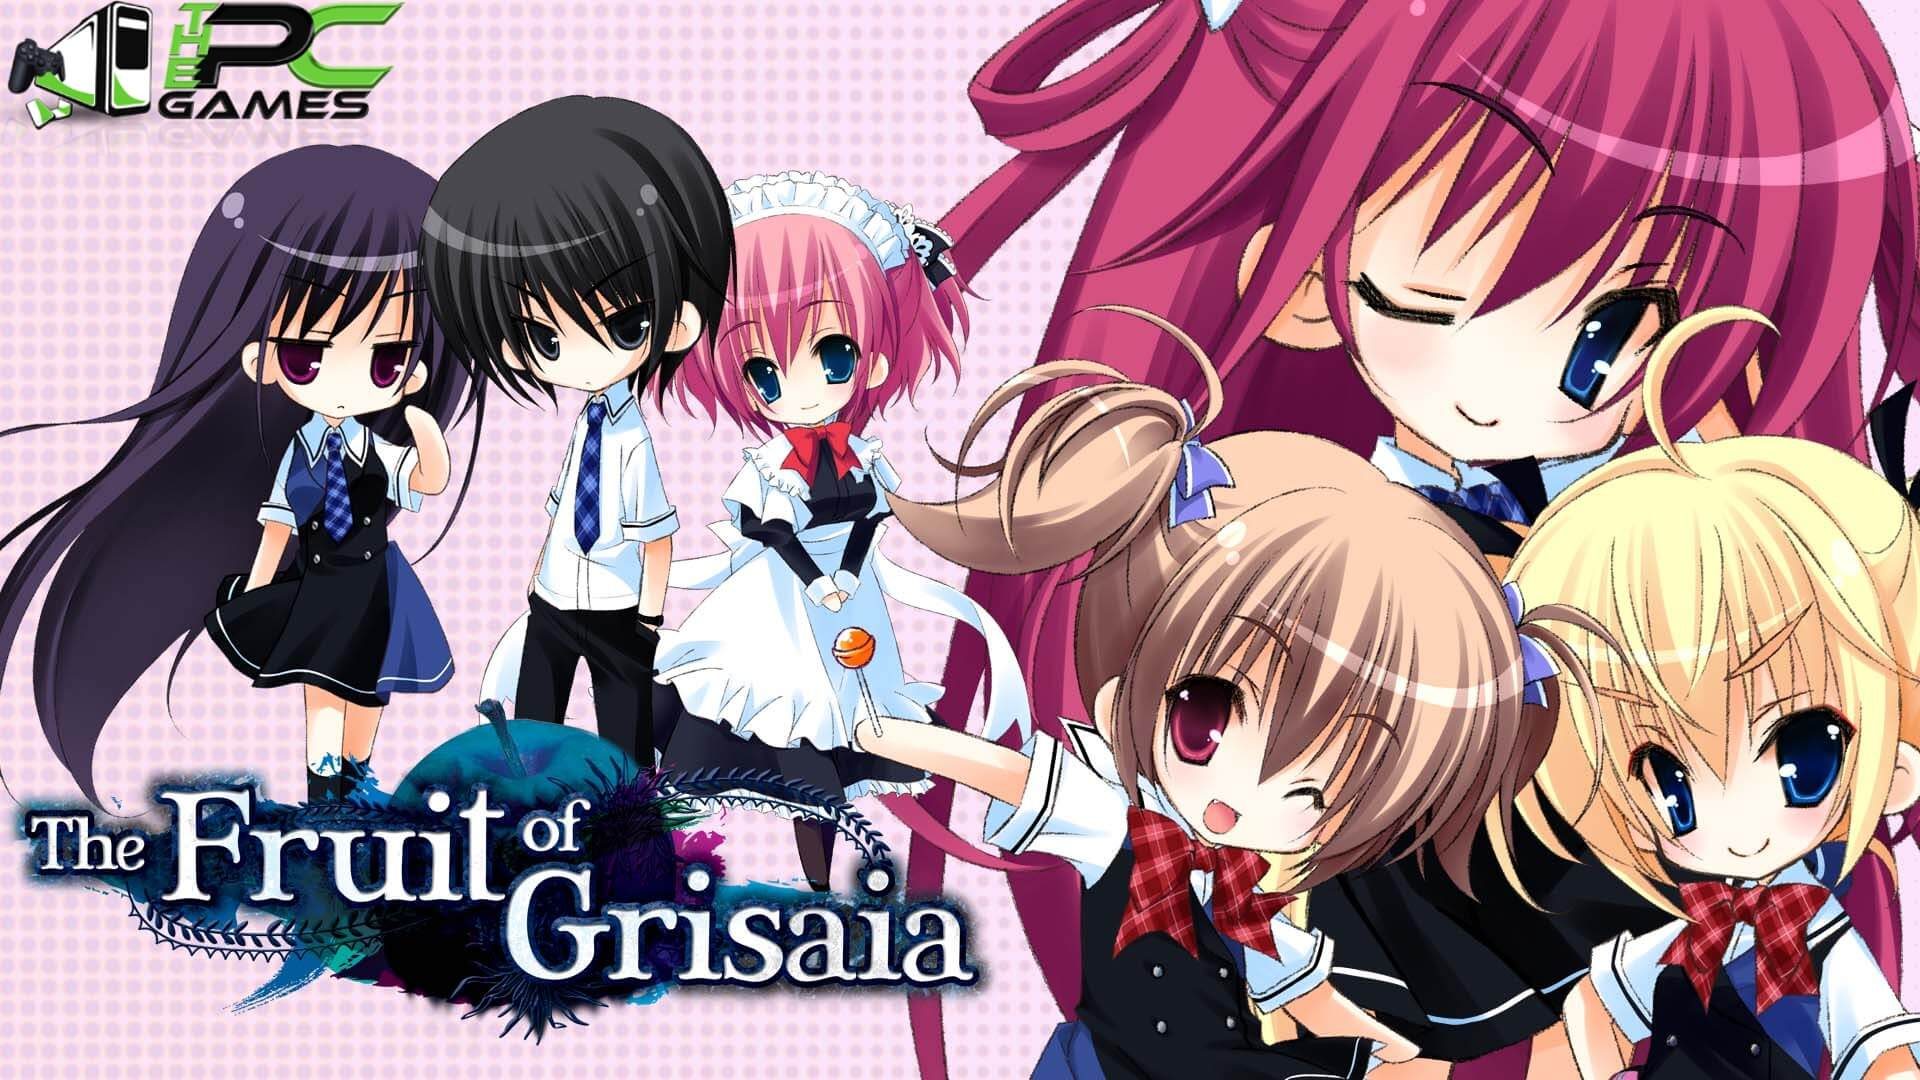 the-fruit-of-grisaia-unrated-edition-game-download-3651382